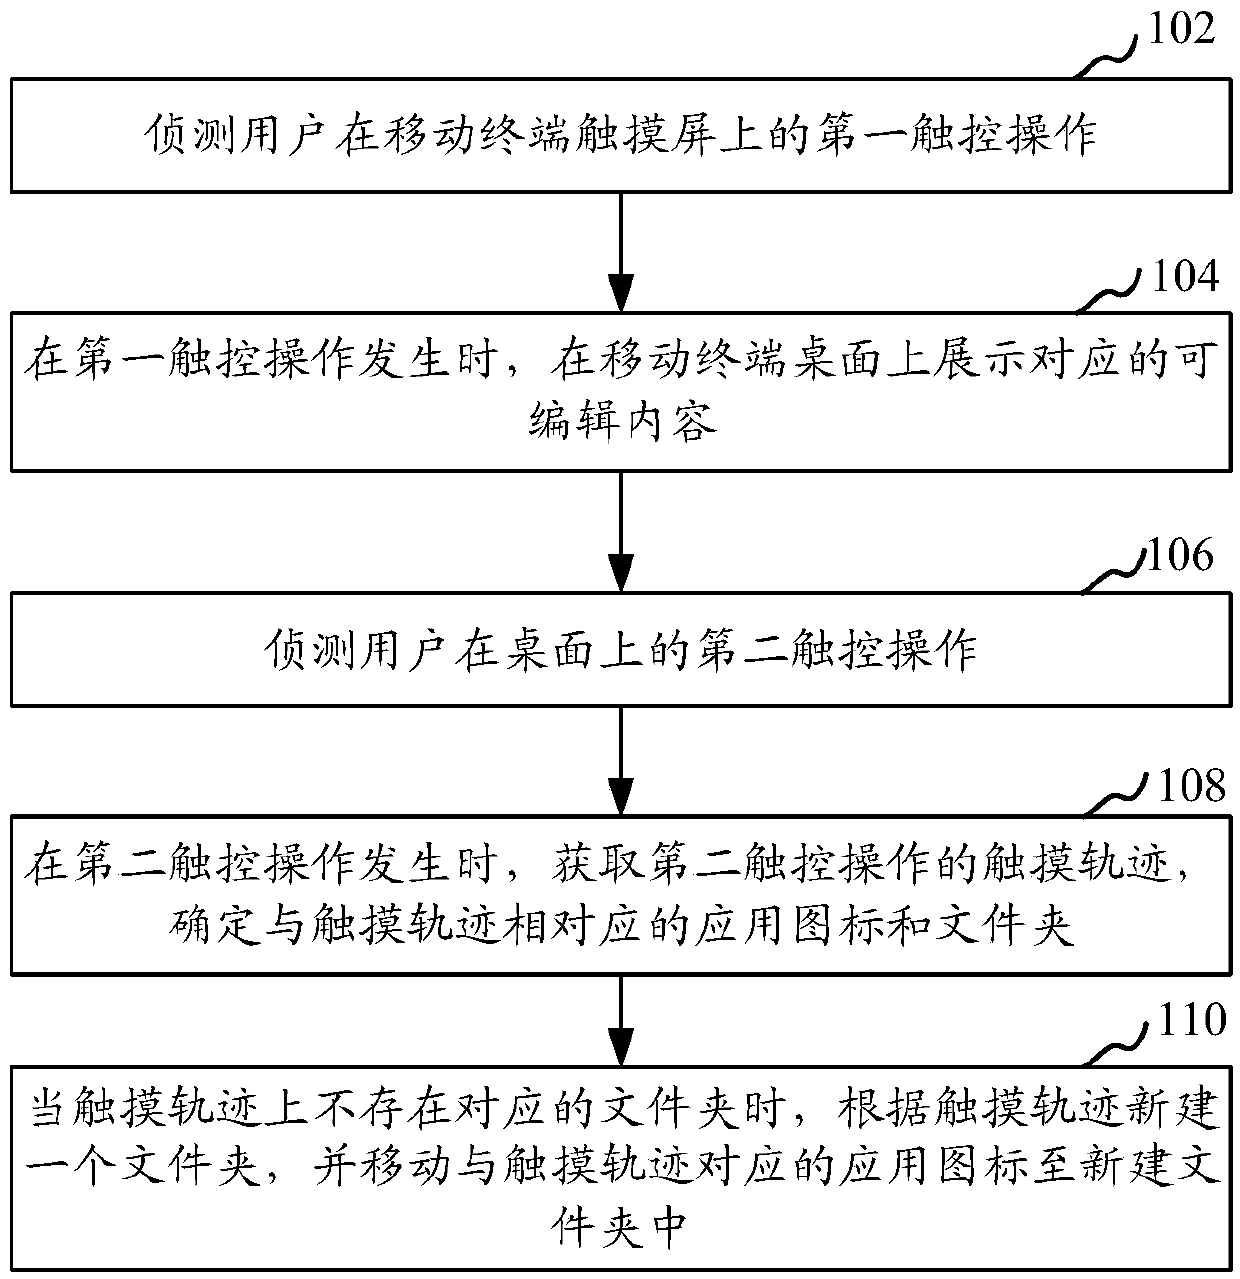 Application icon management method and device